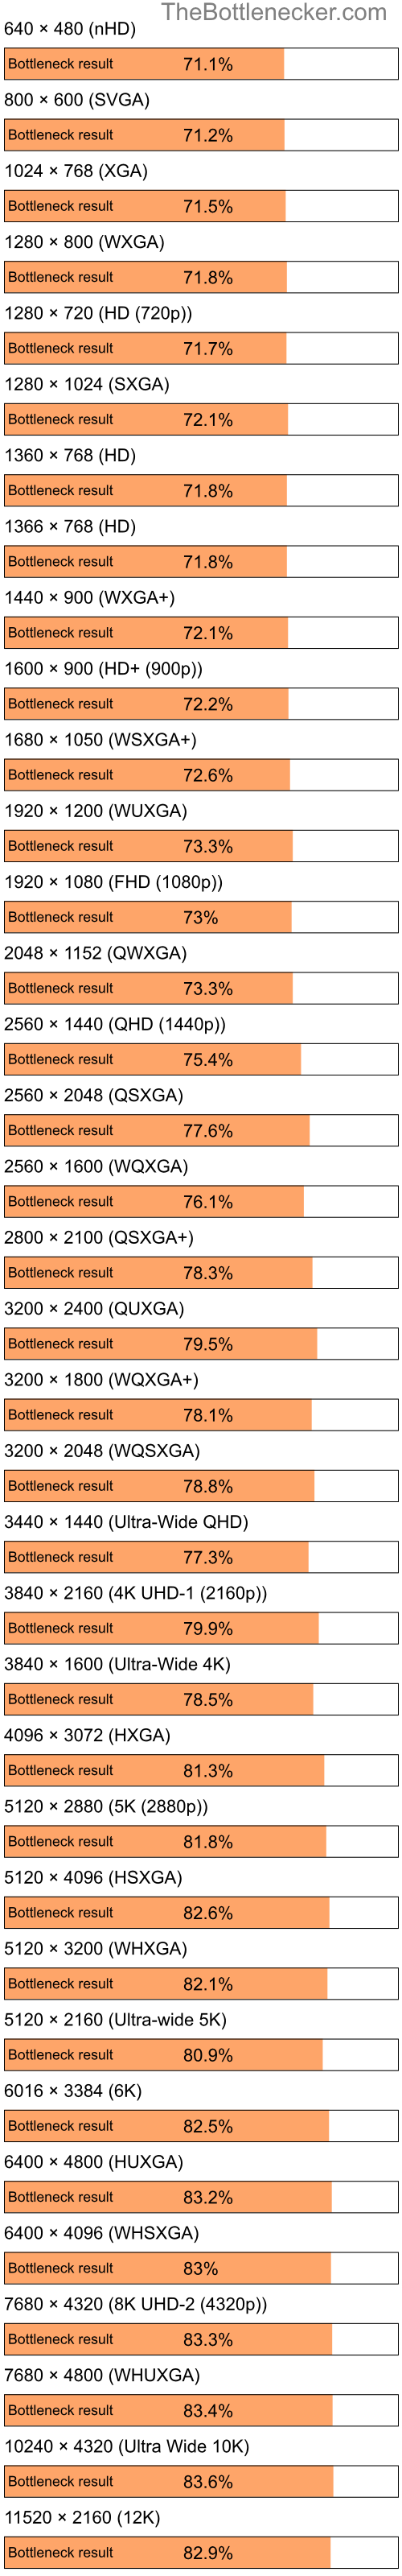 Bottleneck results by resolution for Intel Pentium 4 and NVIDIA GeForce 8600 GS in Graphic Card Intense Tasks